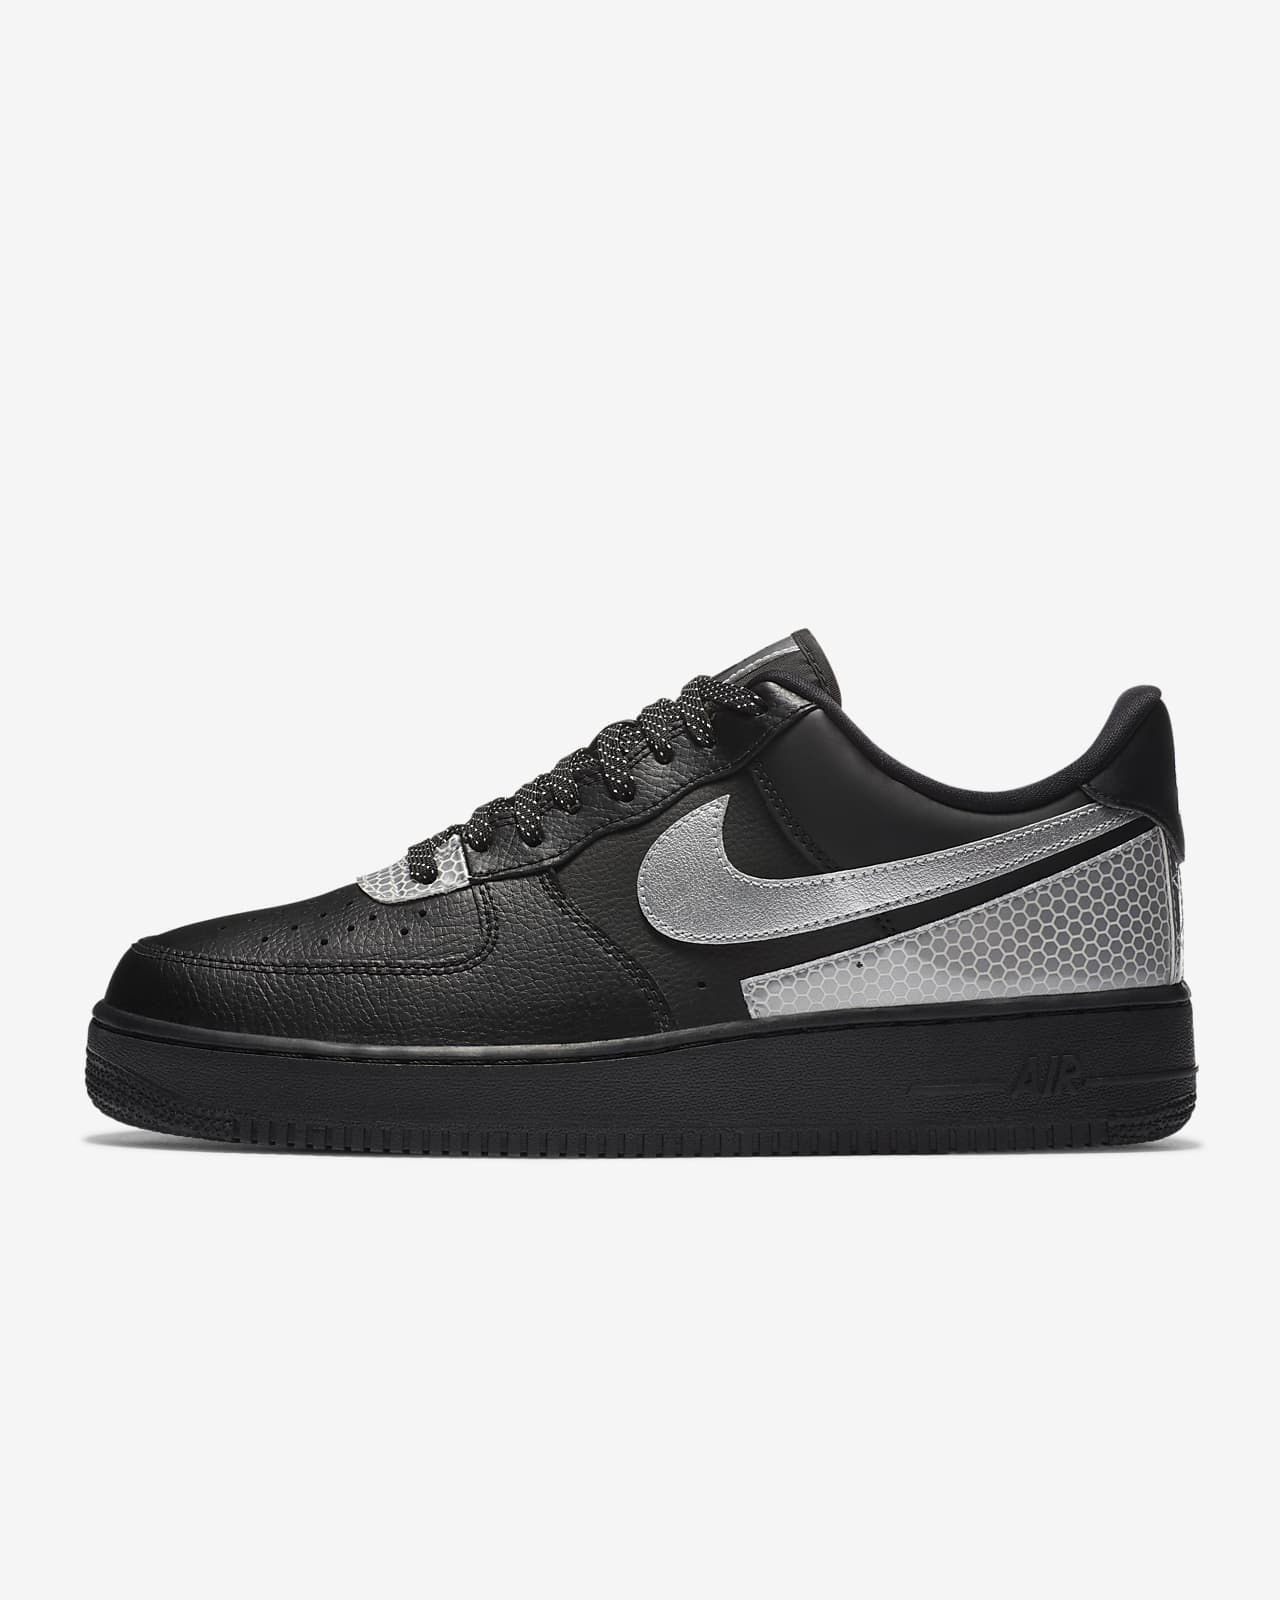 nike air force 1 07 lv8 black and grey